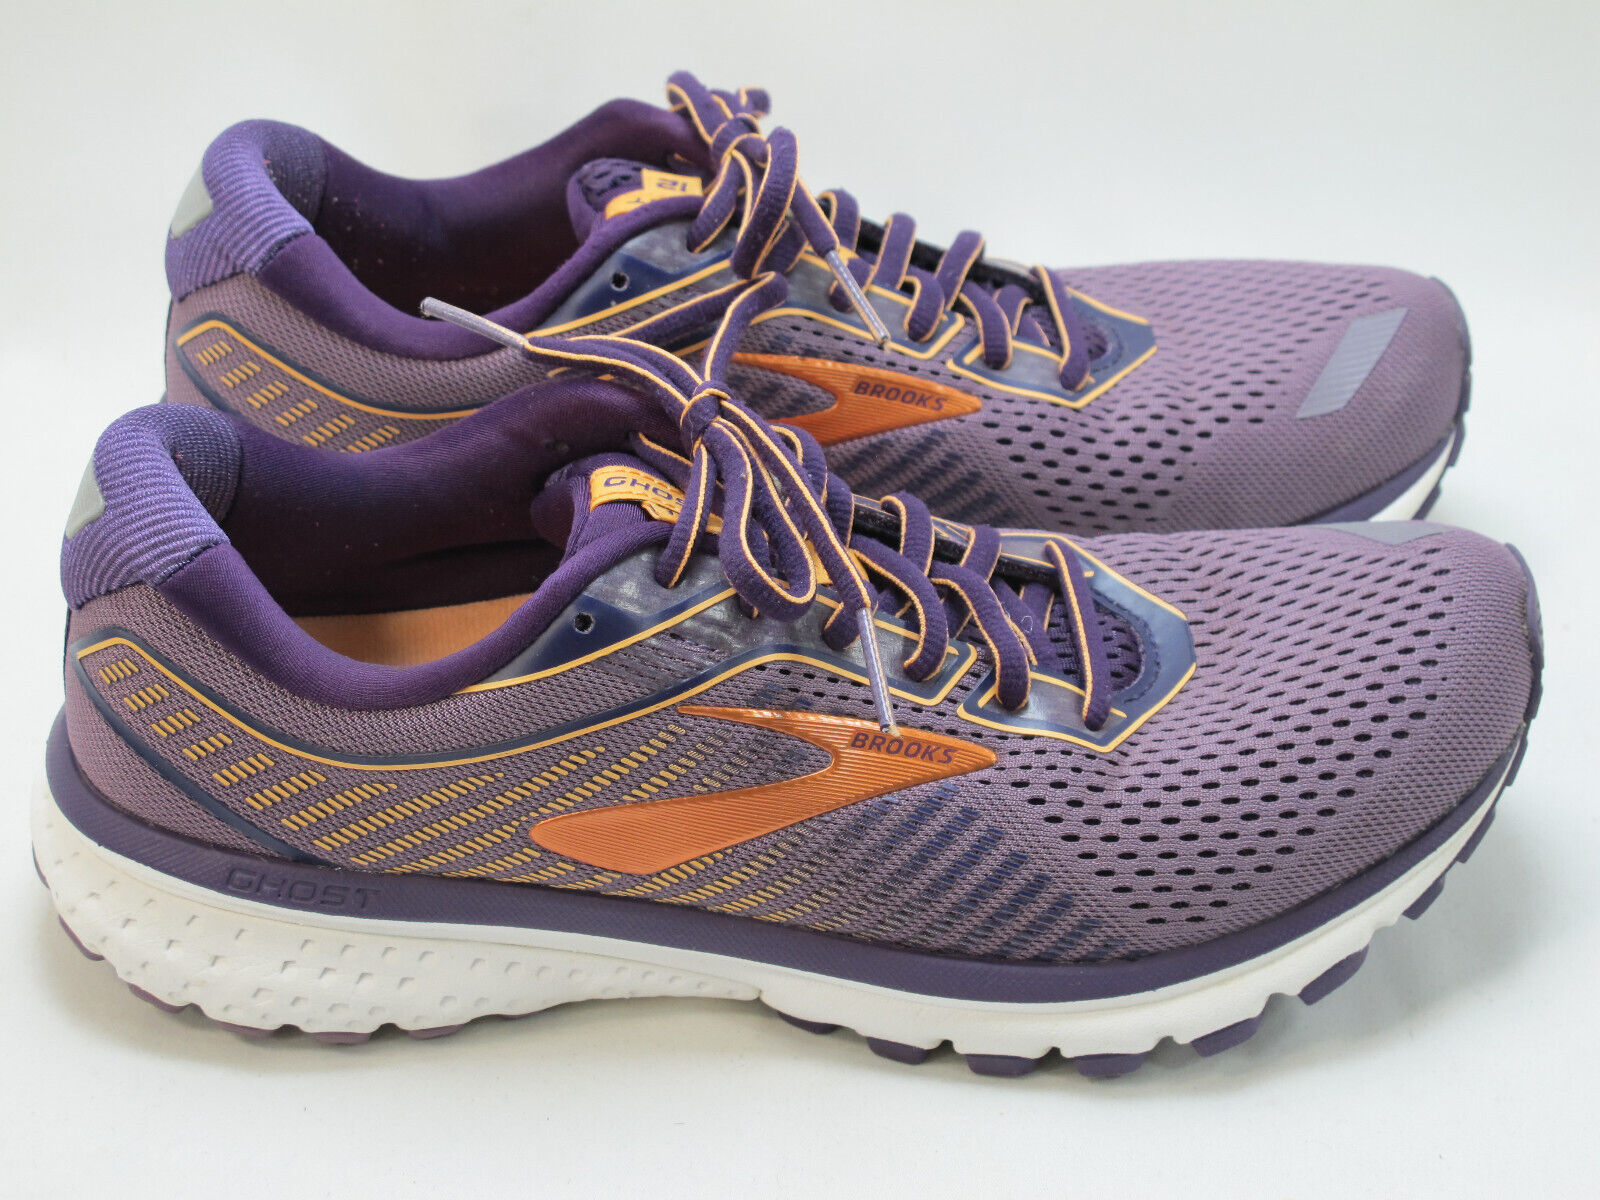 Primary image for Brooks Ghost 12 Running Shoes Women’s Size 10.5 B US Excellent Plus Condition